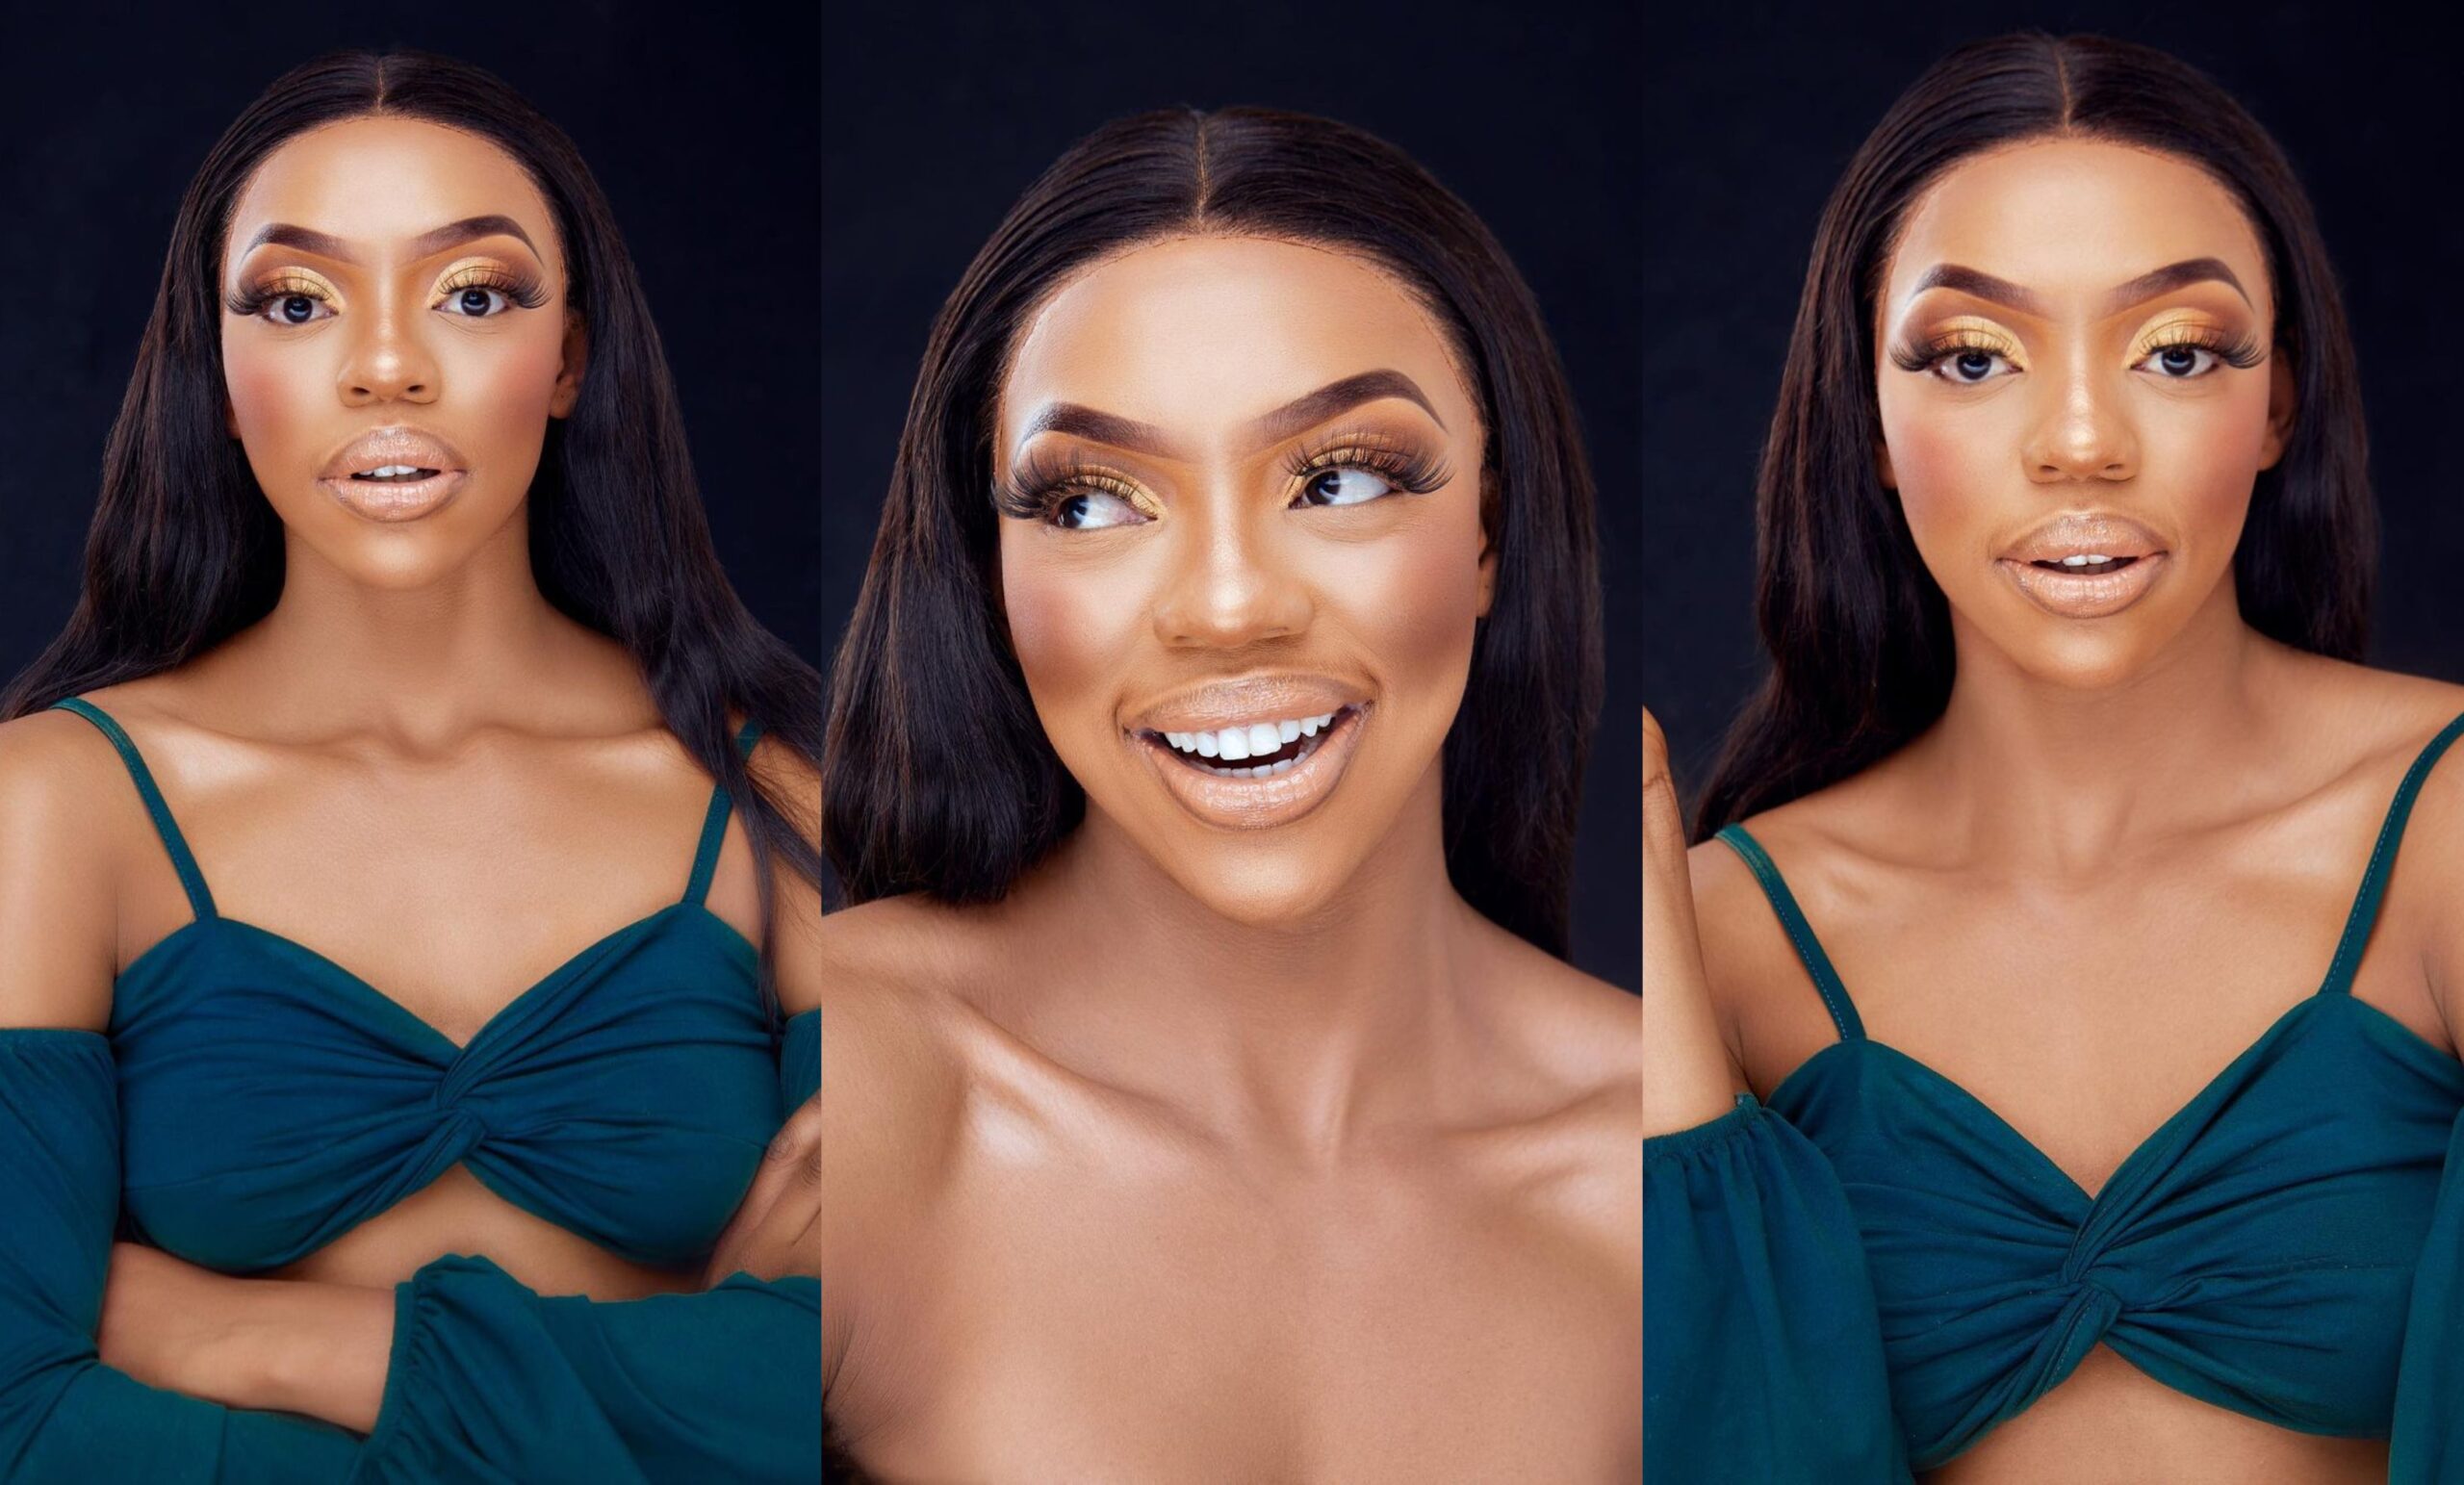 Change your make-up artist and photographer - Nigerians reacts as Khosi shares new photos of herself